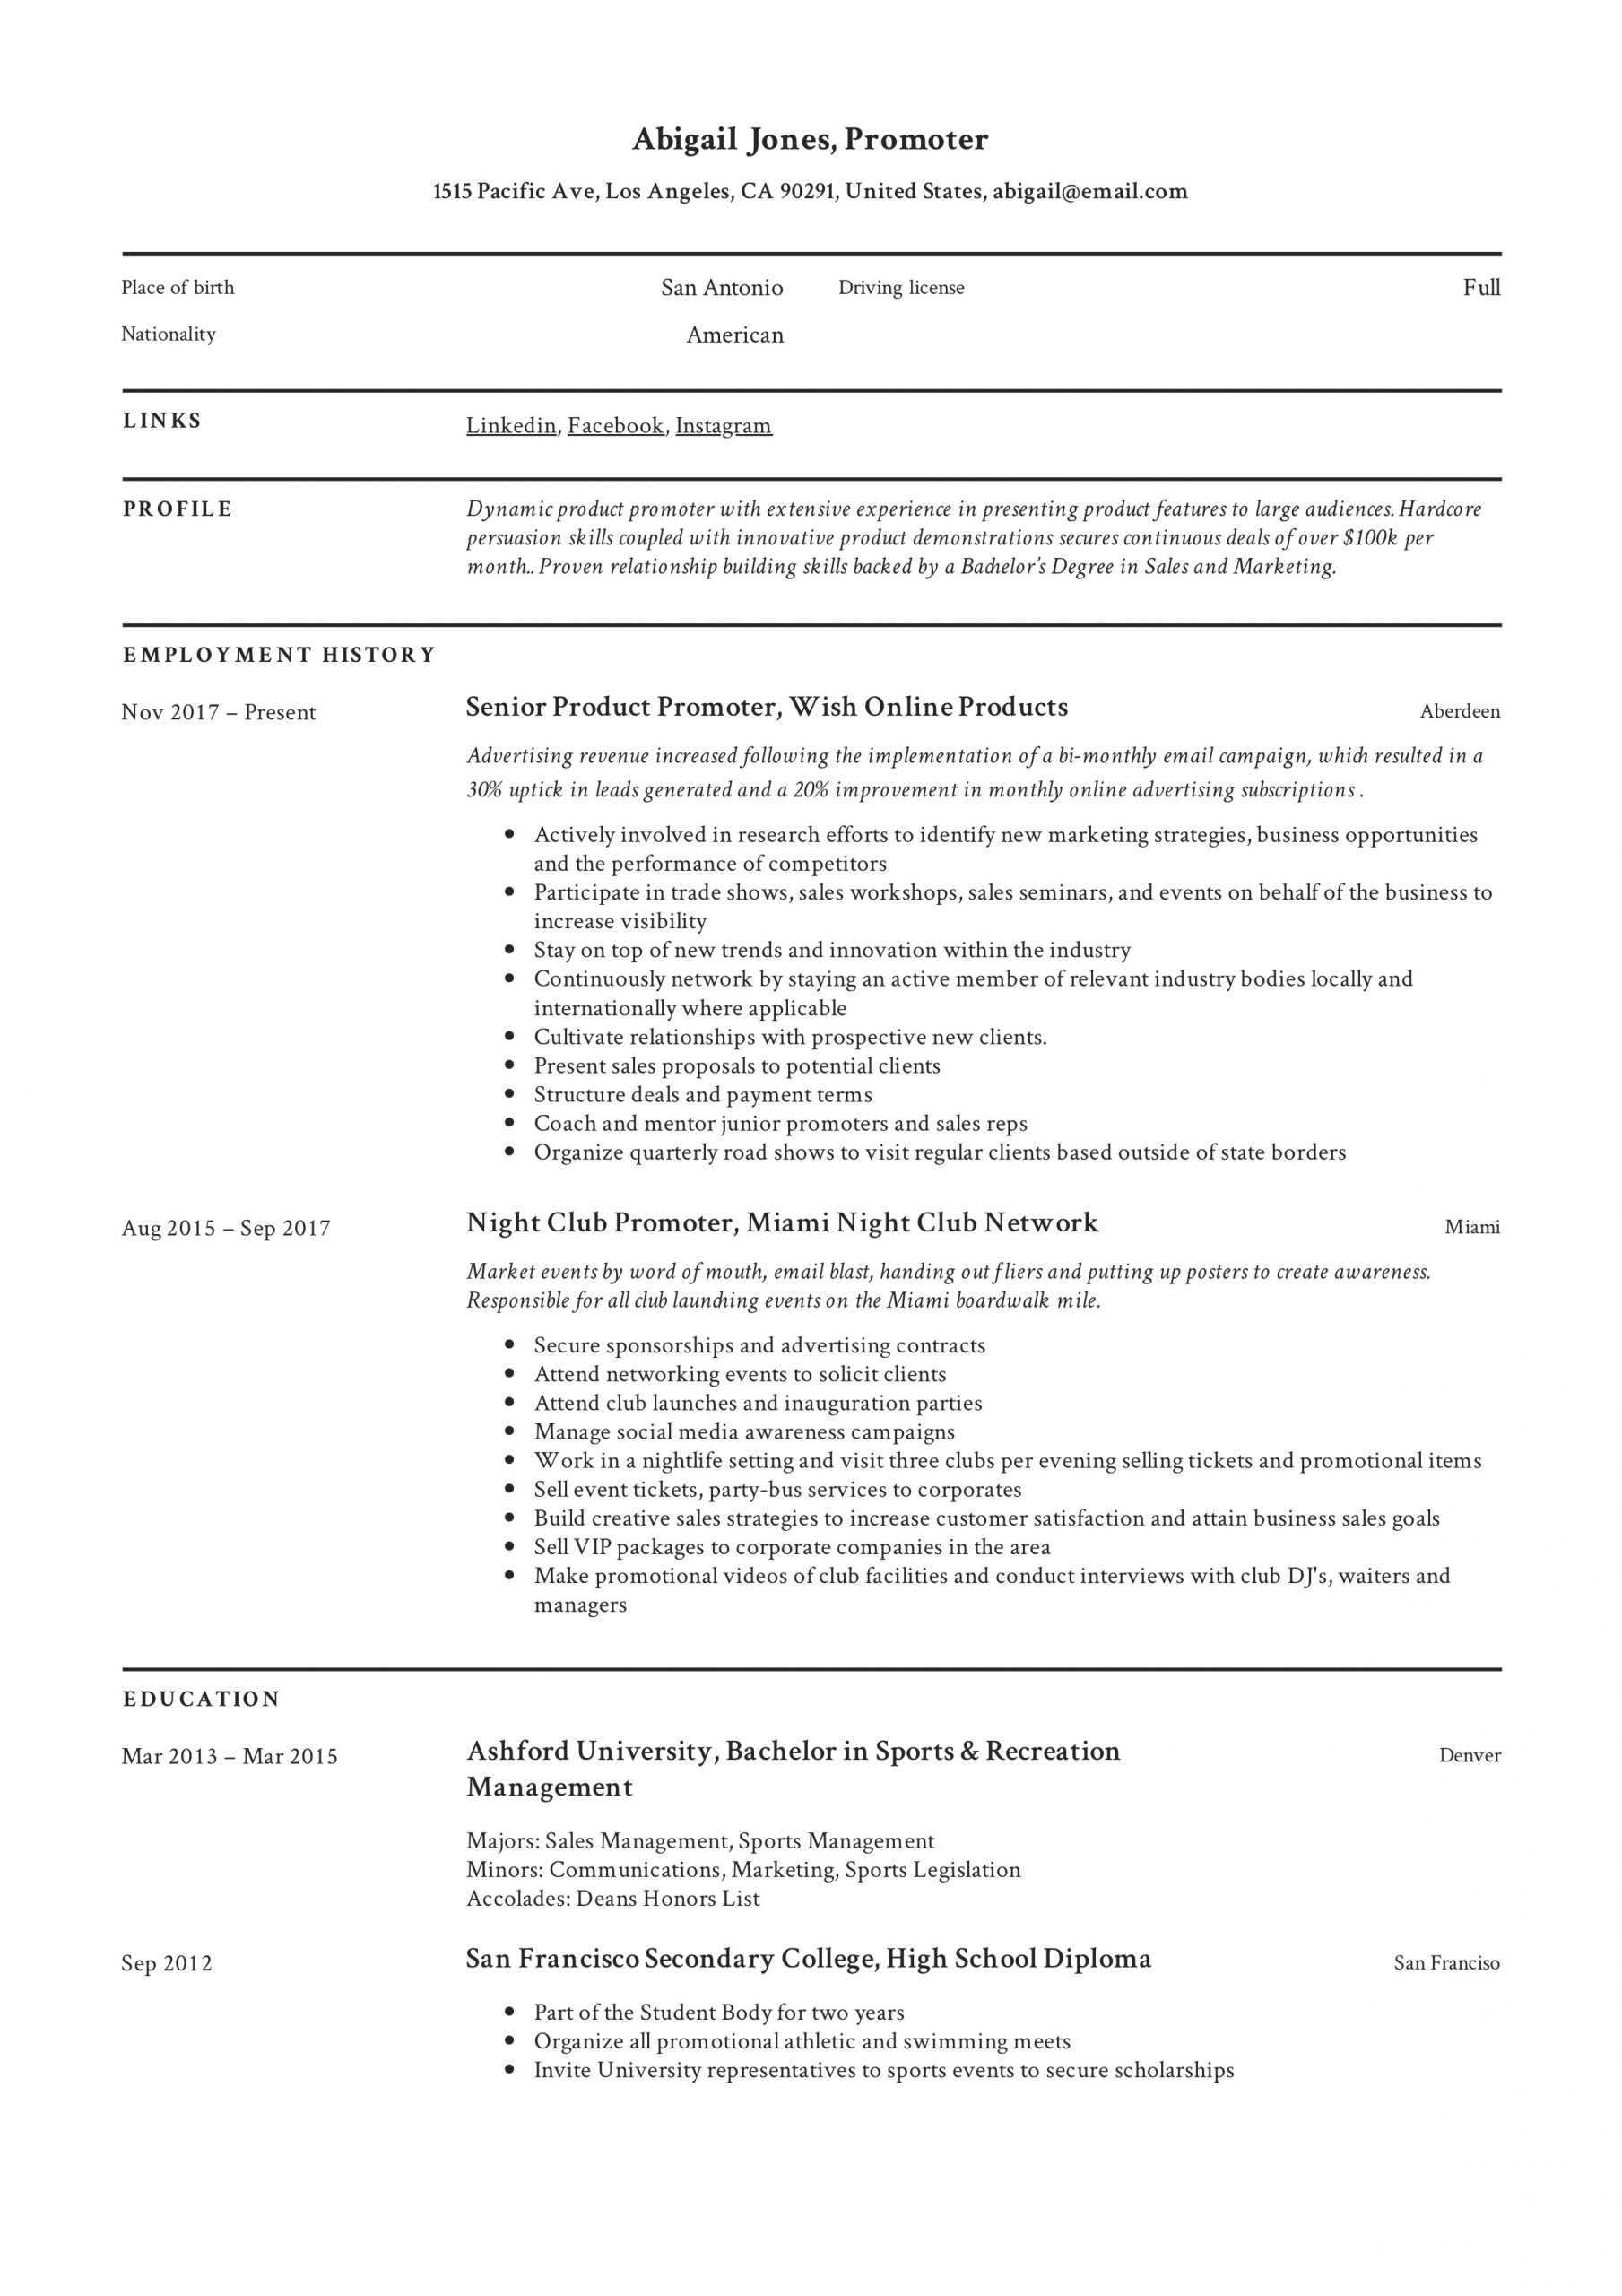 Resume for Promotion within Same Company Sample Promoter Resume Example & Writing Guide 12 Samples Pdf 2020